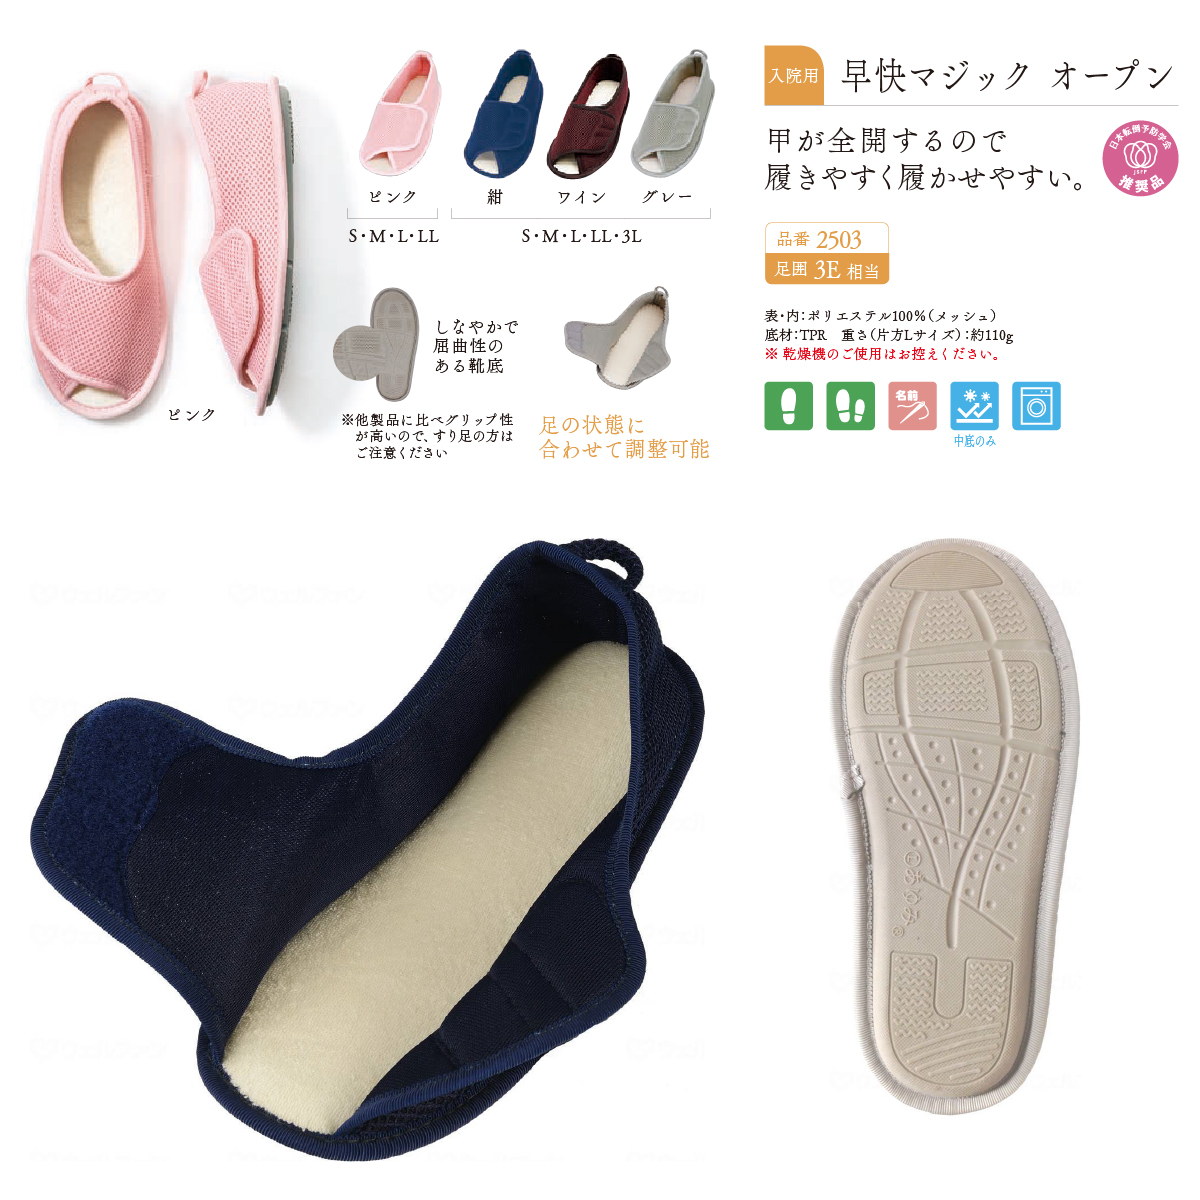  slippers shoes hospital for go in . for . inside for .. Magic open (2503) is possible to choose 4 color man woman common use 